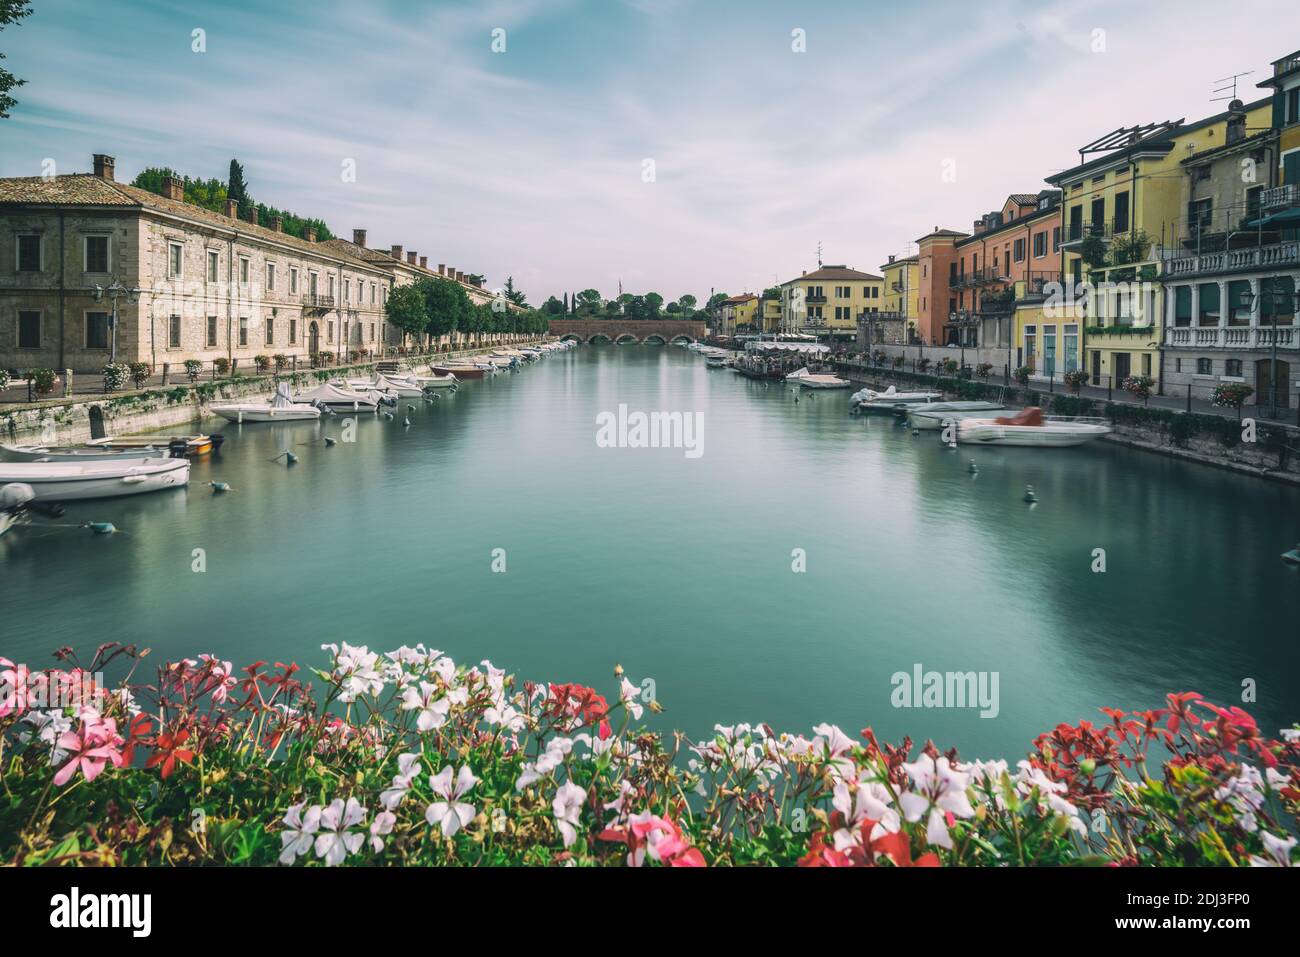 Colorful town of Peschiera del Garda with boats and blurred geranium flowers. The city is located at lake Lago di Garda,East of Venice, Italy, Europe. Stock Photo